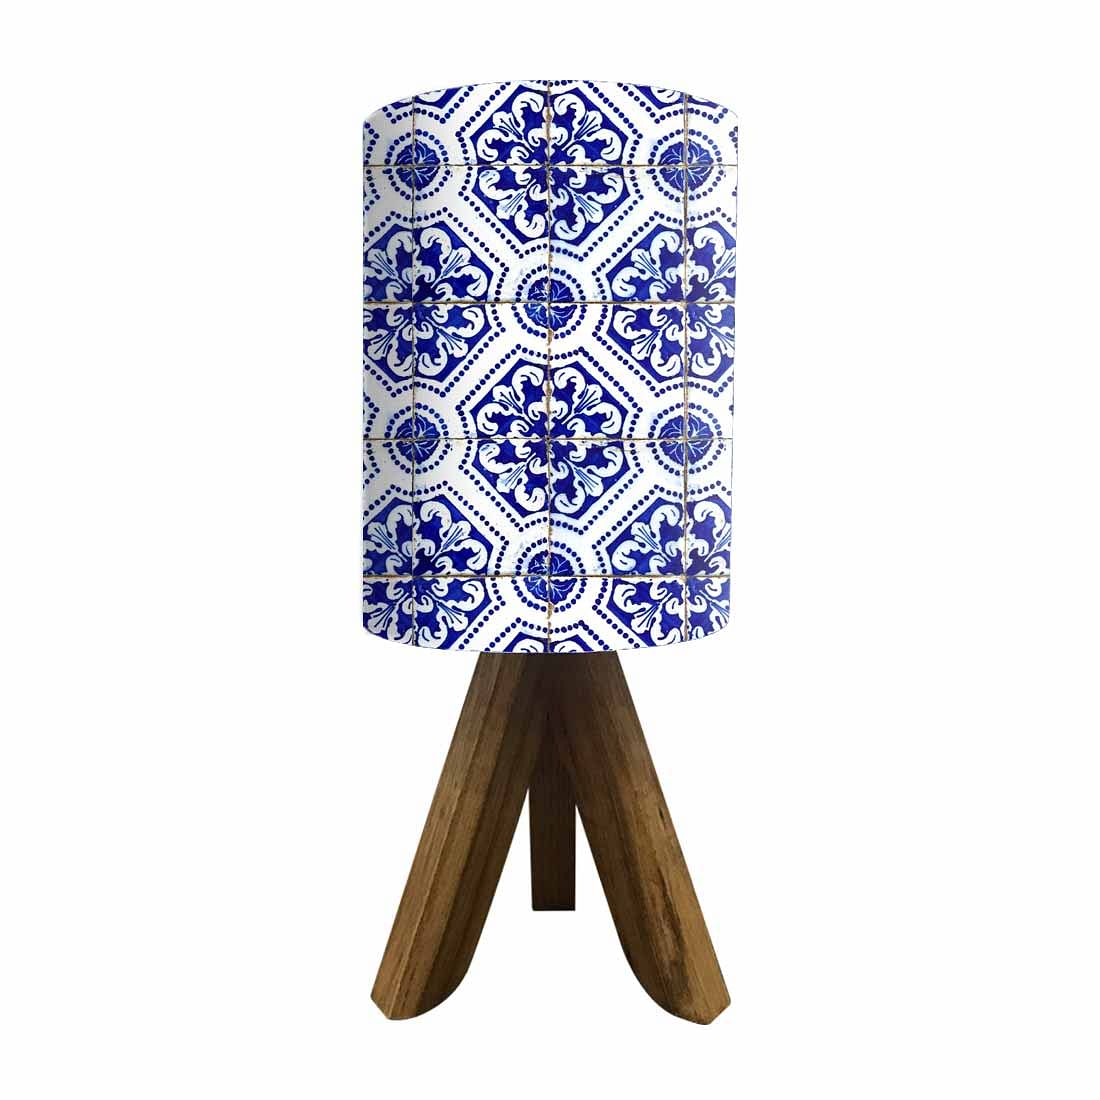 Wooden Table Lamps For Bedroom - Dotted Blue Flower Tiles Nutcase